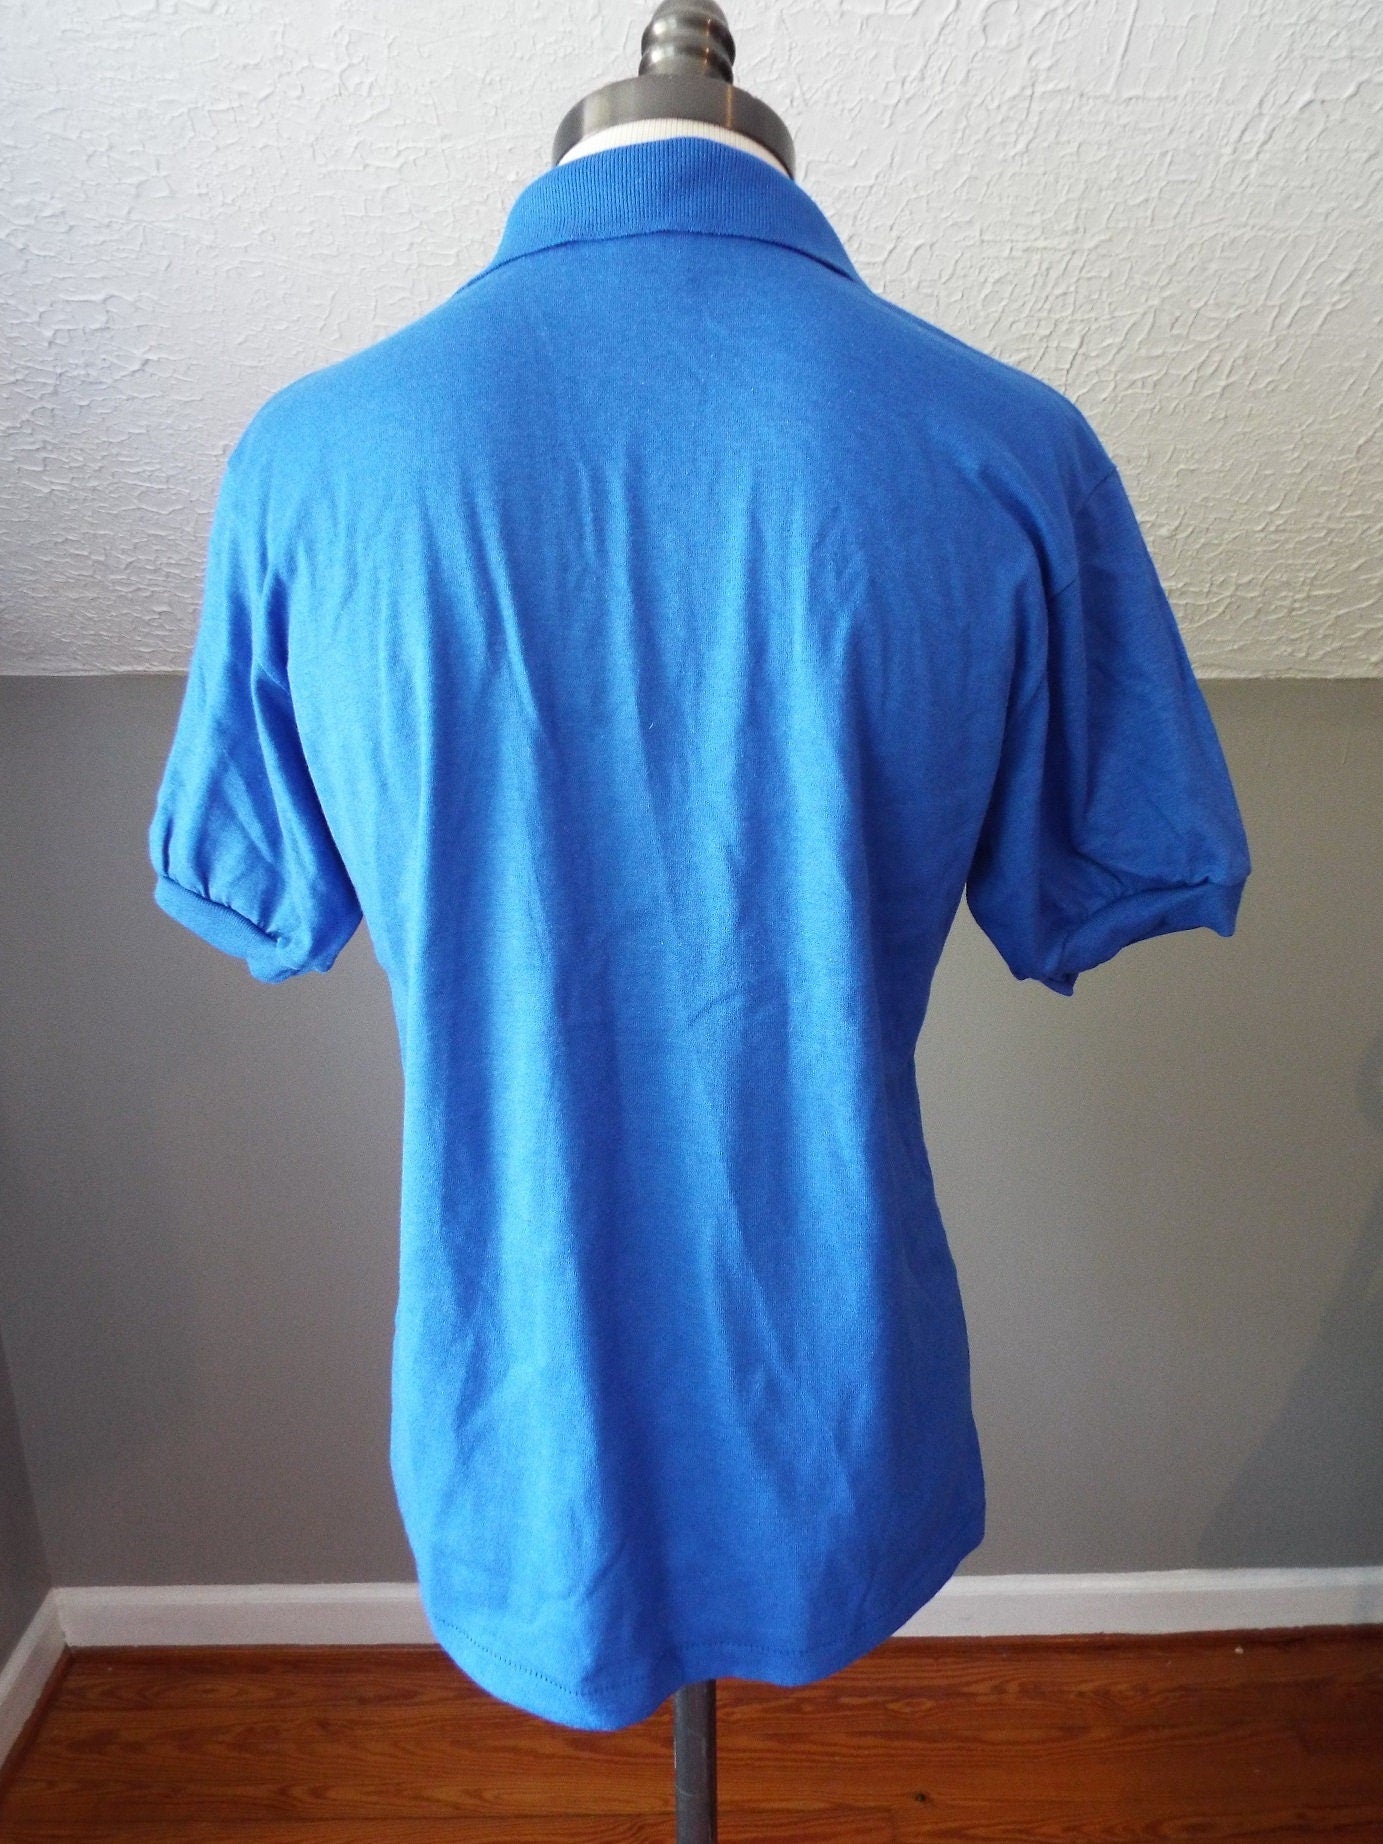 Vintage Short Sleeve Blue Polo Shirt by Screen Stars